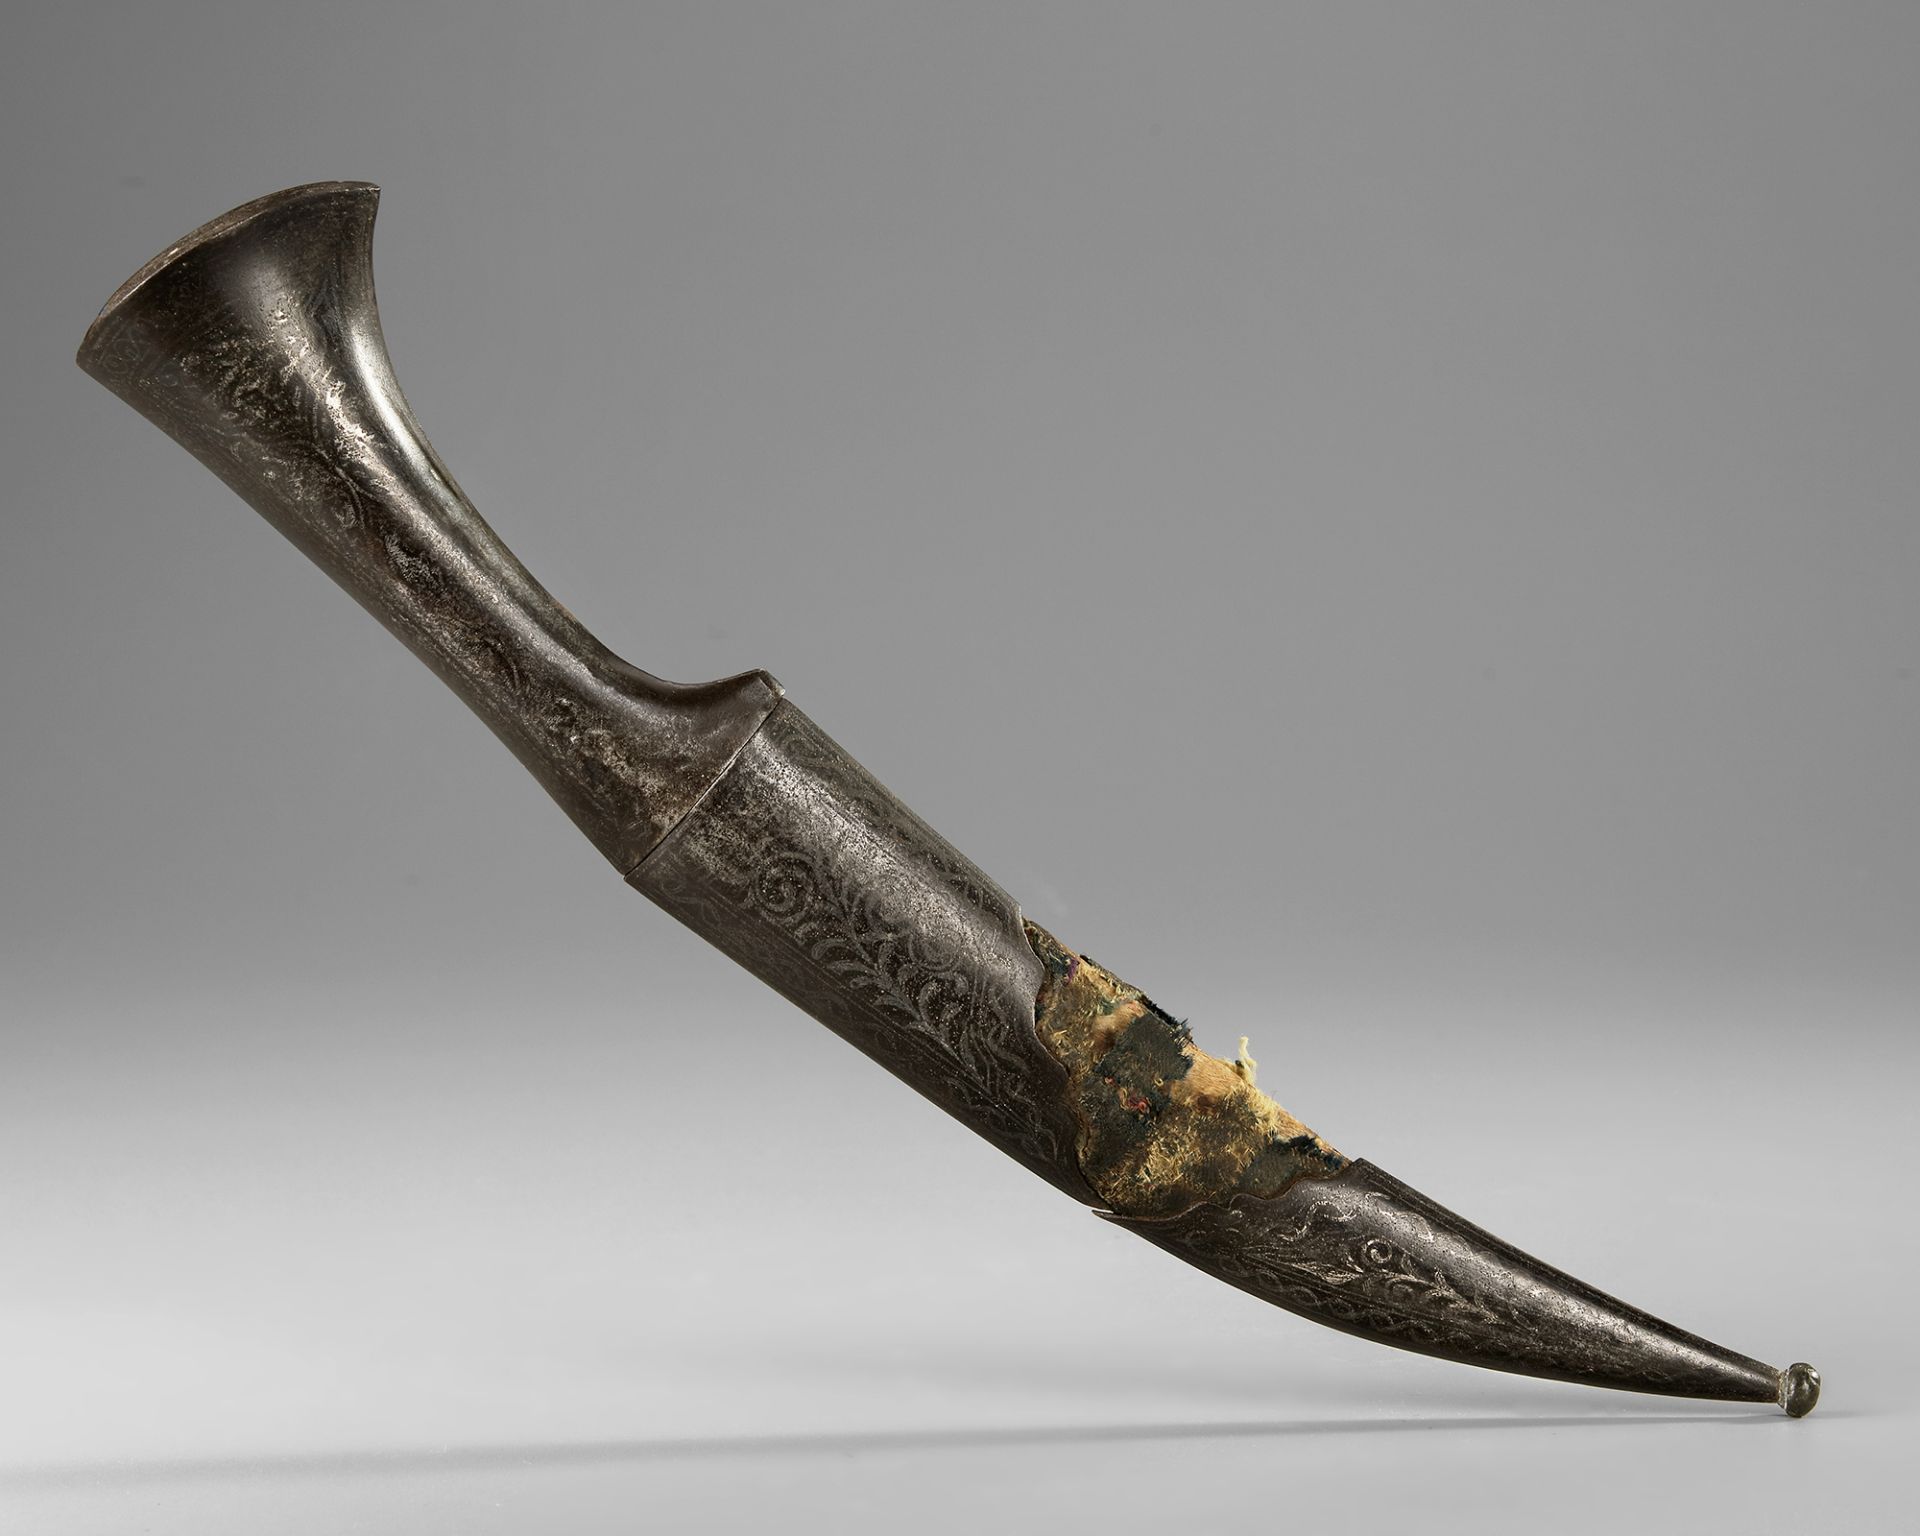 A MUGHAL DAGGER AND SHEATH MADE FOR THE OTTOMAN MARKET, DECCAN 18TH CENTURY - Image 4 of 4